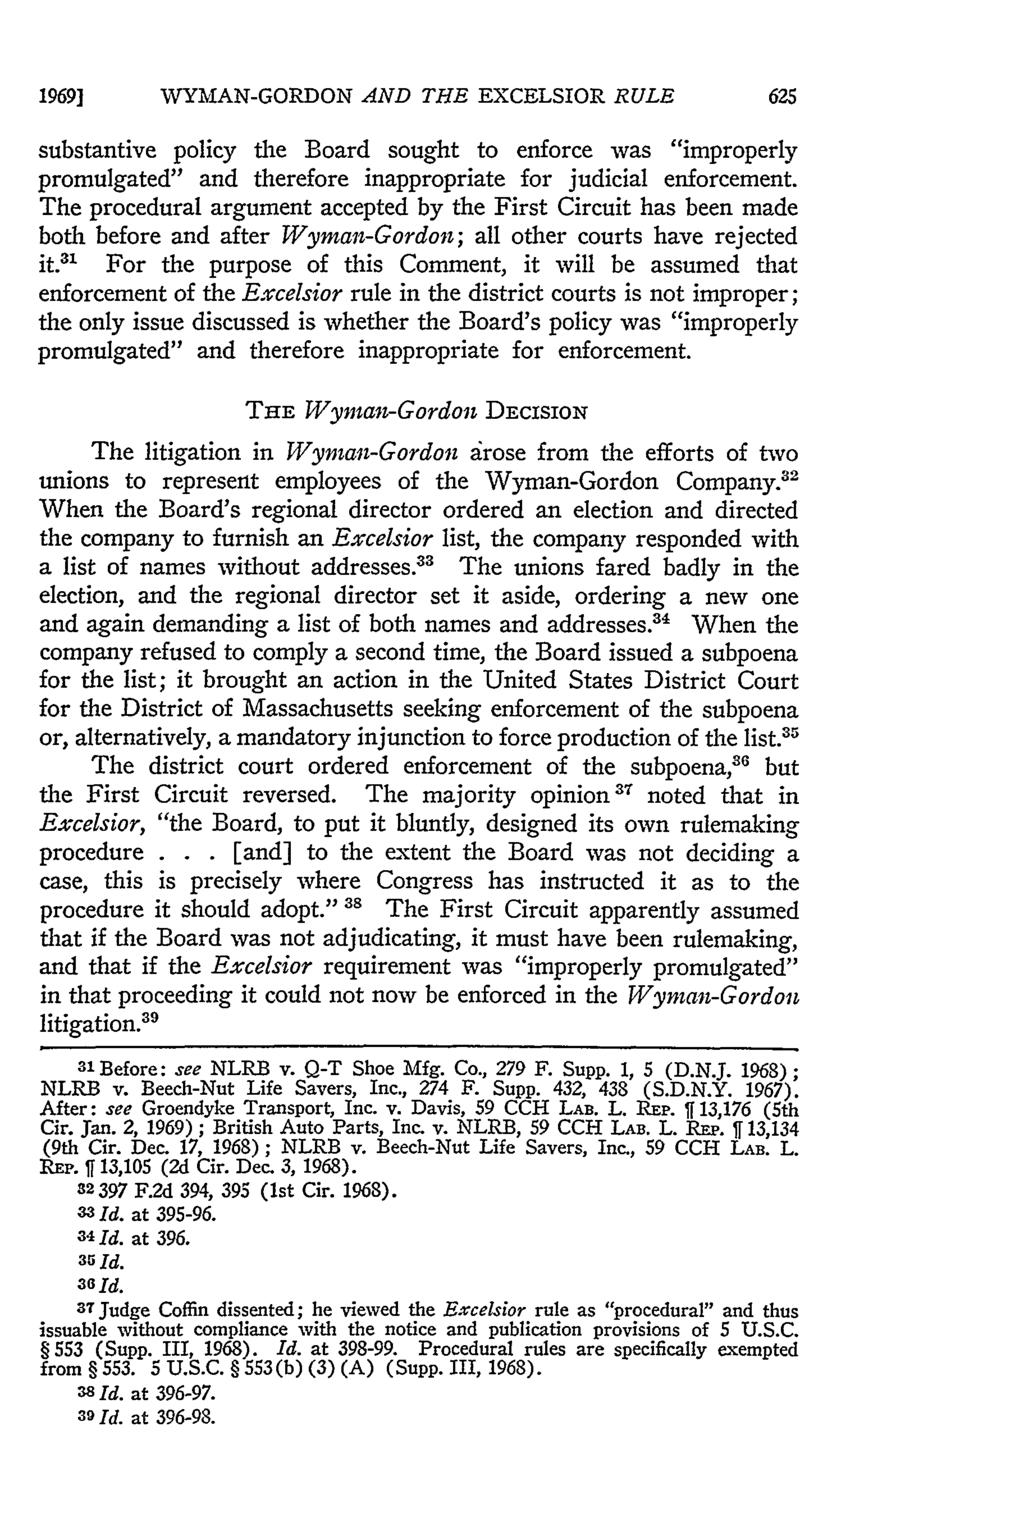 1969] WYMAN-GORDON AND THE EXCELSIOR RULE substantive policy the Board sought to enforce was "improperly promulgated" and therefore inappropriate for judicial enforcement.